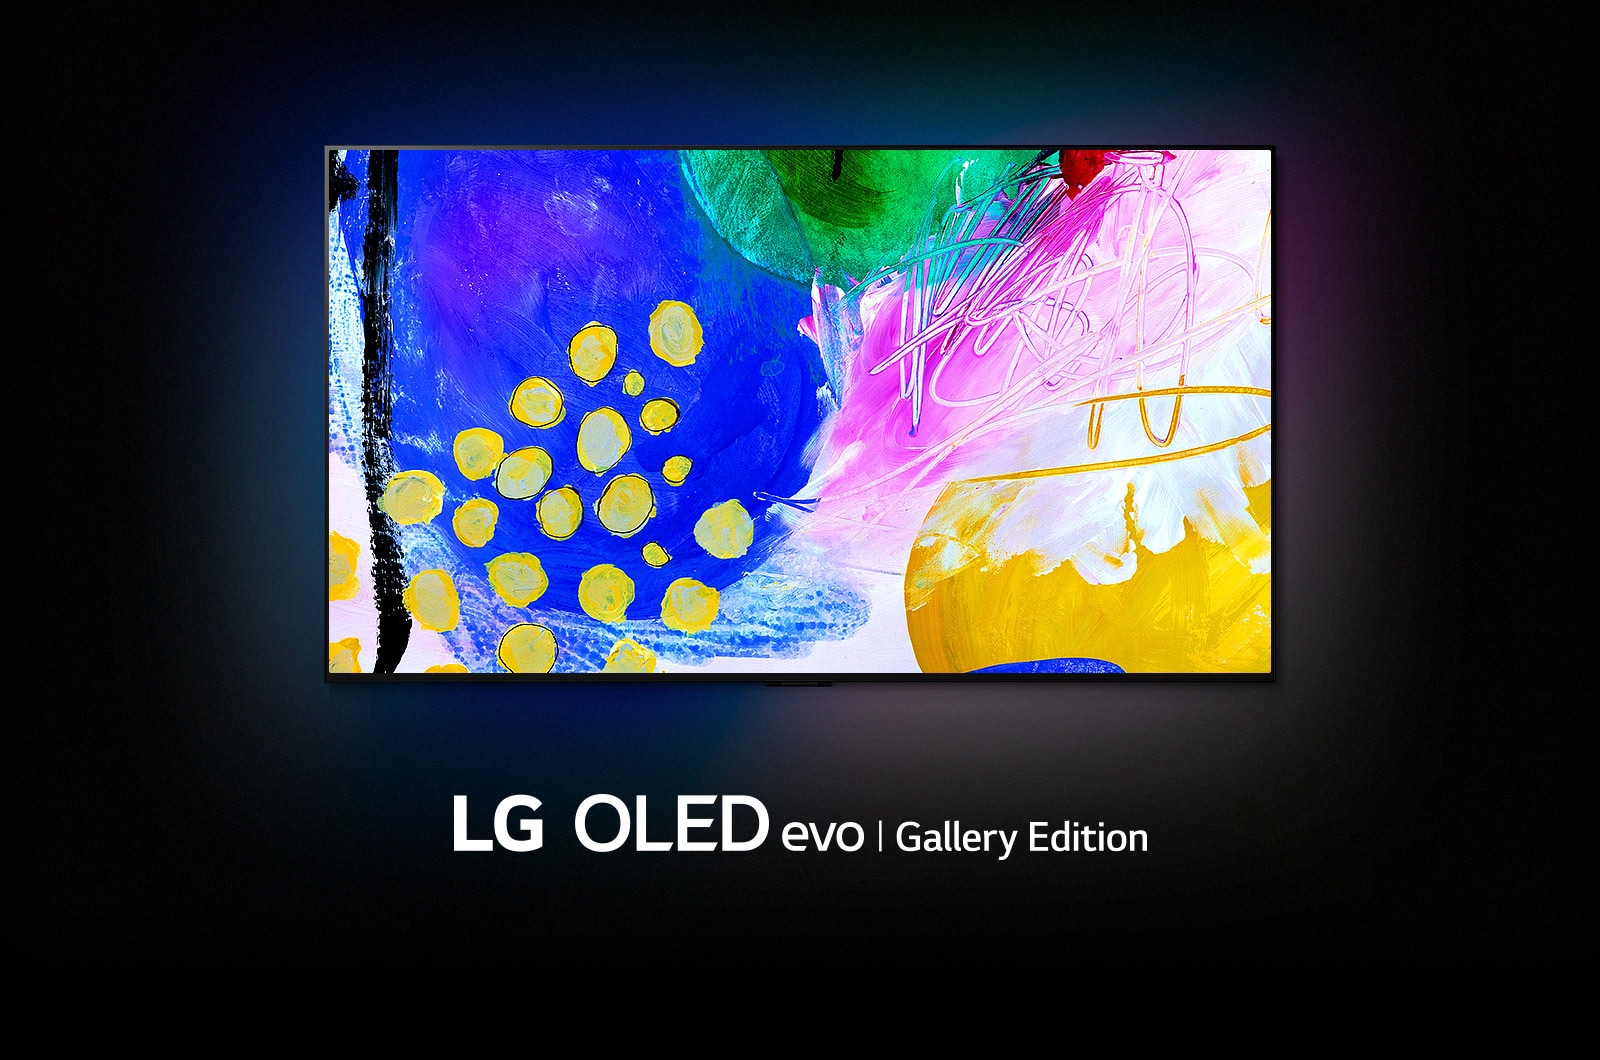 An LG OLED G2 is in a dark room with a colorful abstract artwork of shapes on its display and the words "LG OLED evo Gallery Edition" underneath.